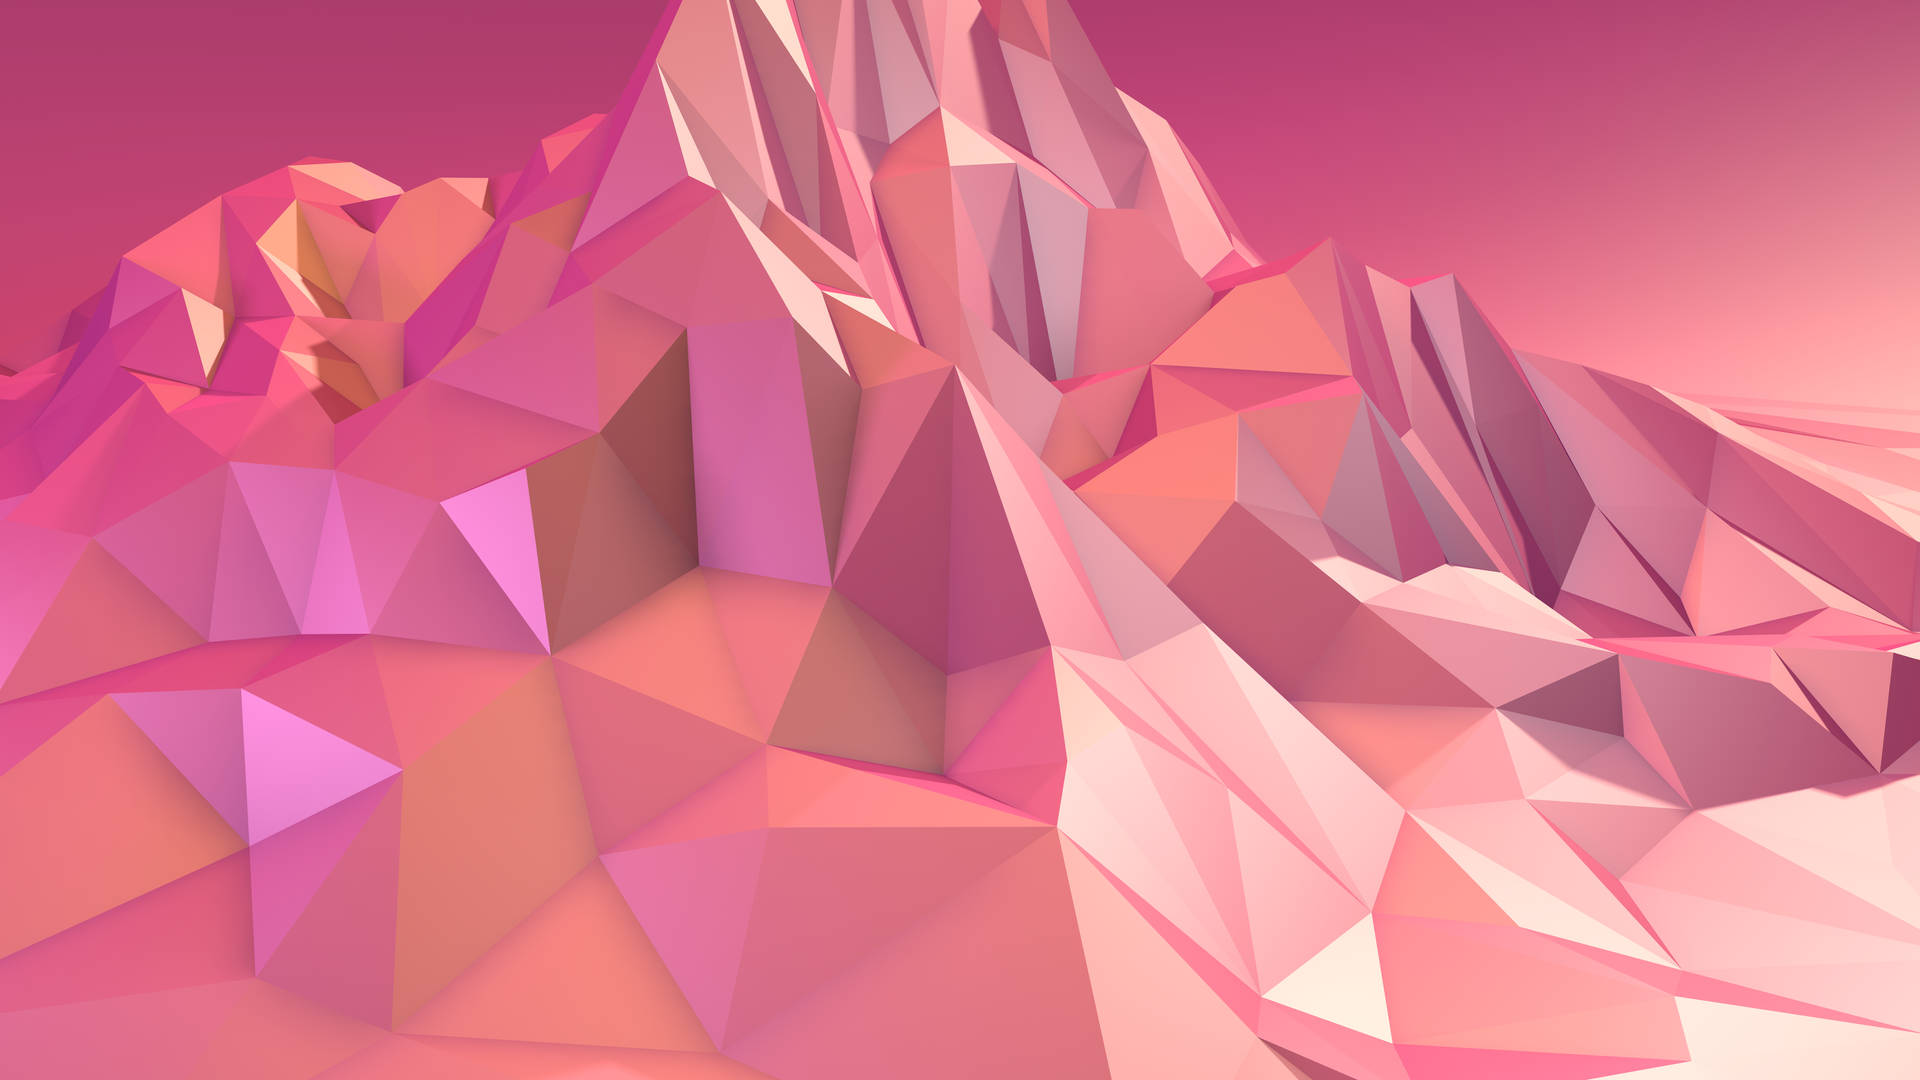 Light Pink Aesthetic Abstract Mountain Wallpaper